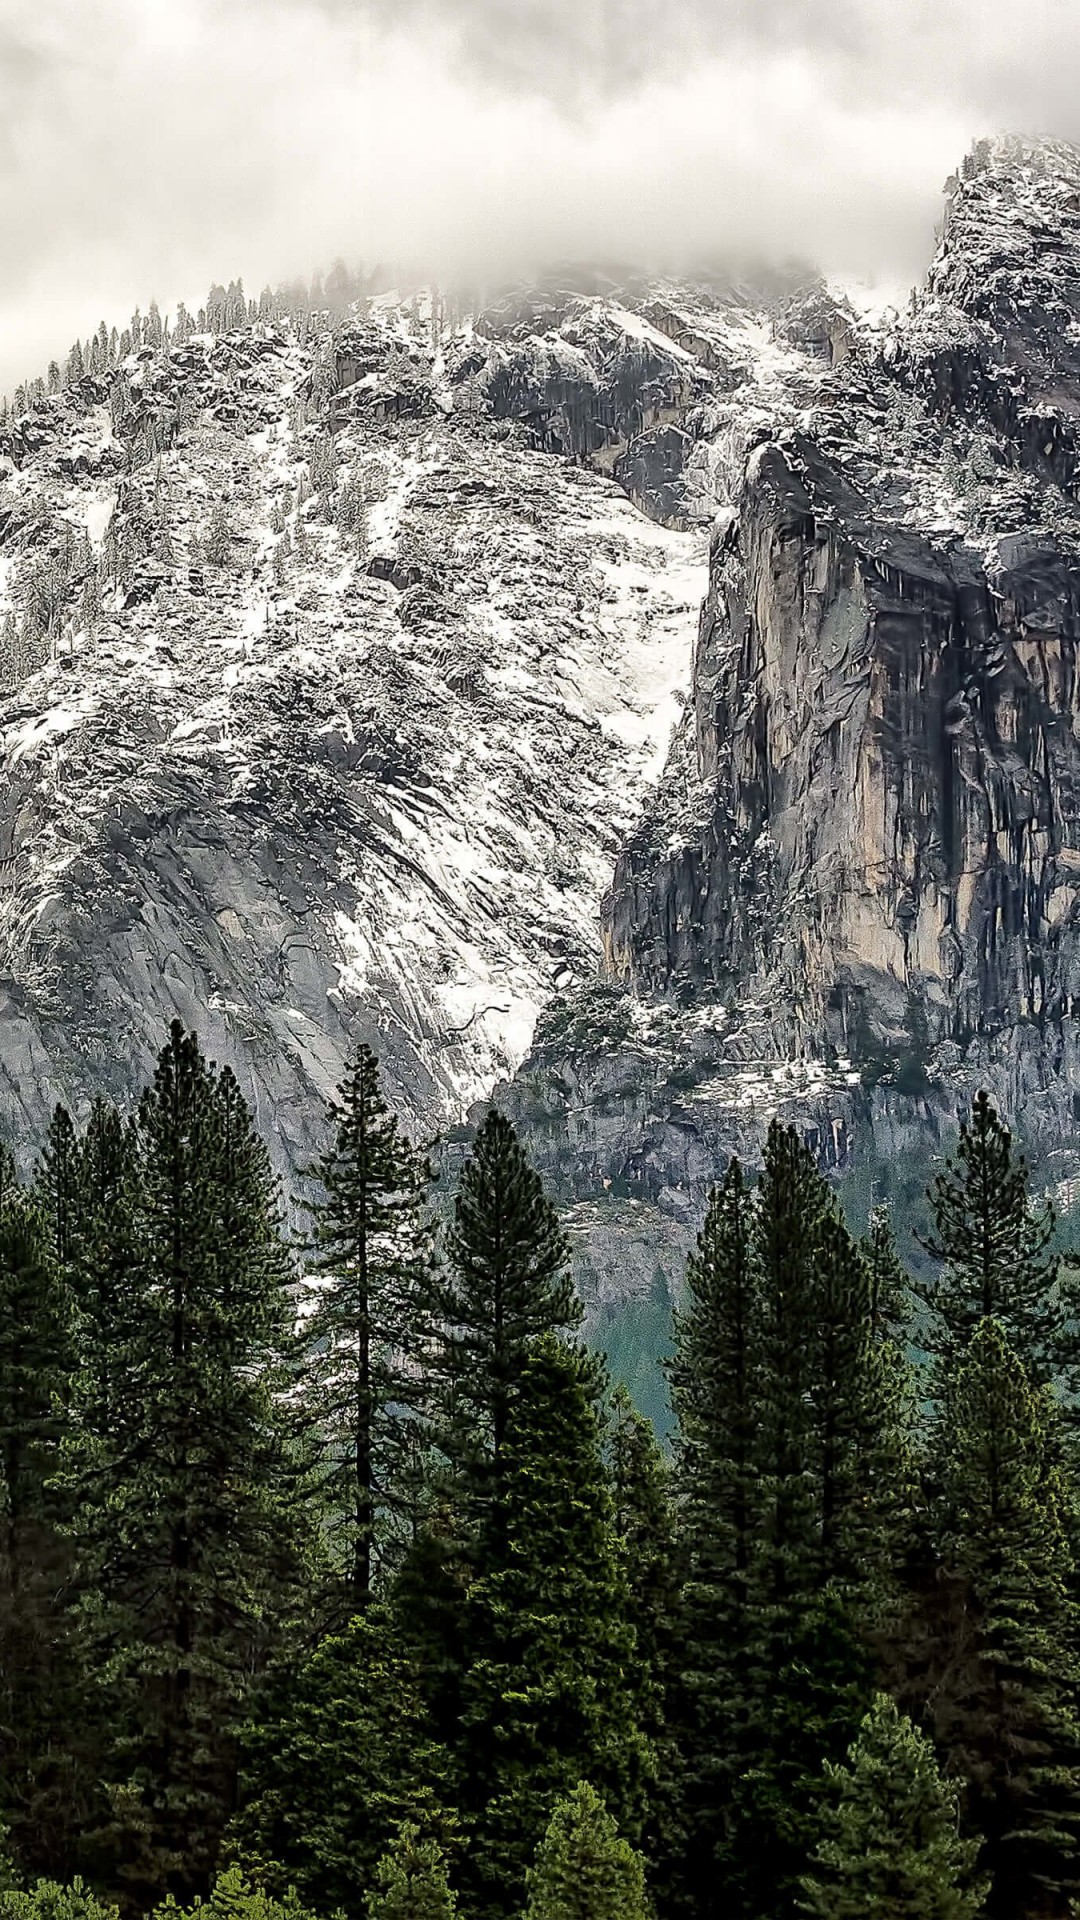 Winter Day at Yosemite National Park Wallpaper for HTC One